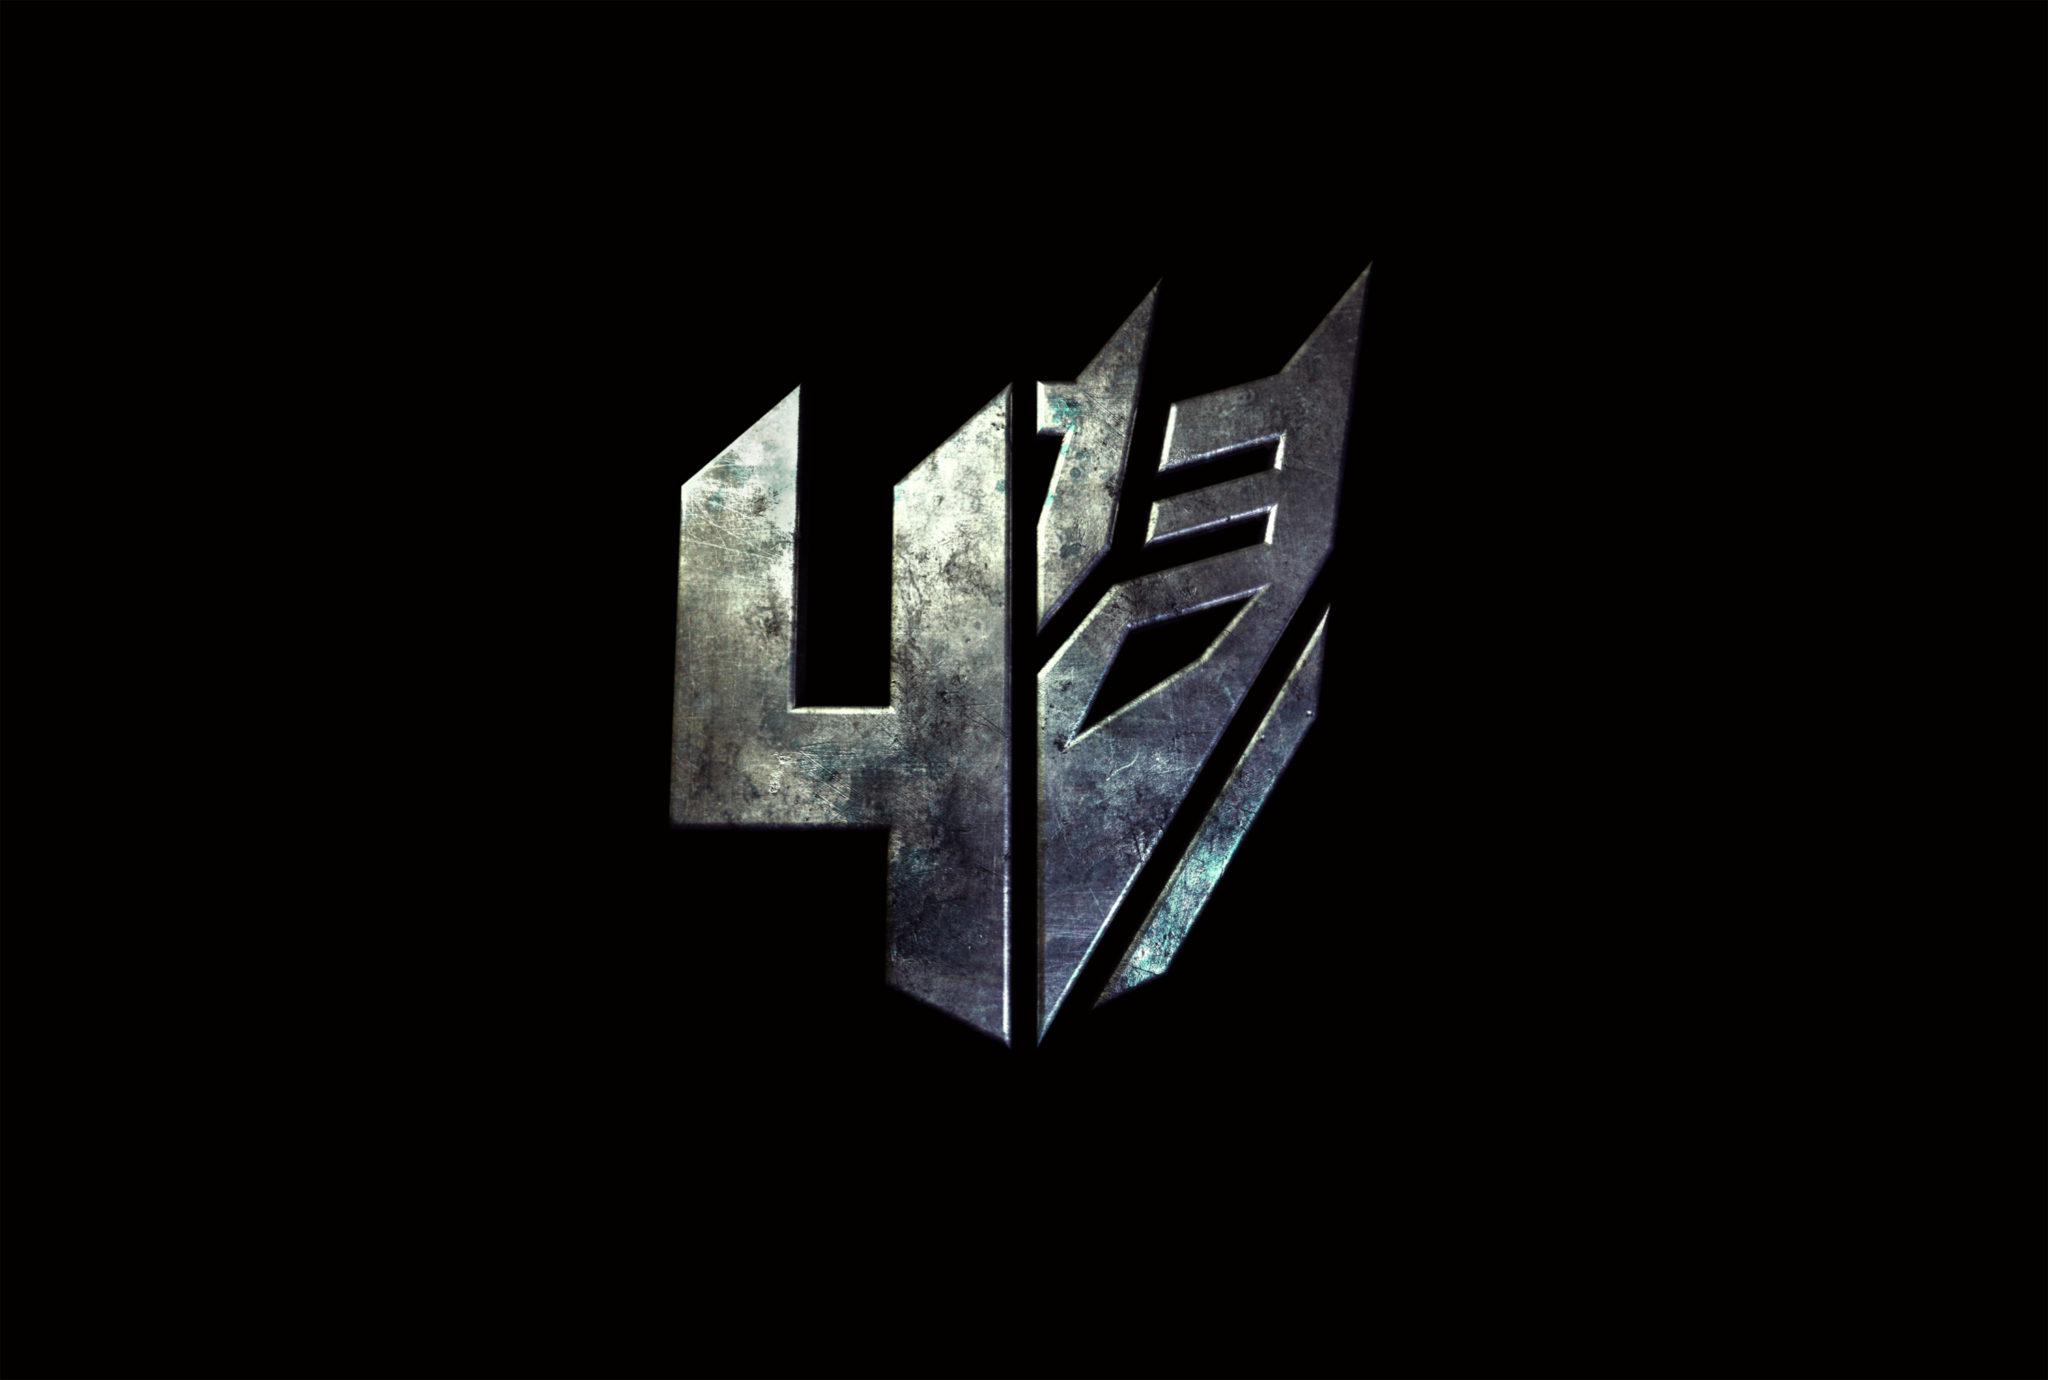 transformers 4, facts, mark wahlberg, michael bay, role, movie, franchise, dwayne johnson